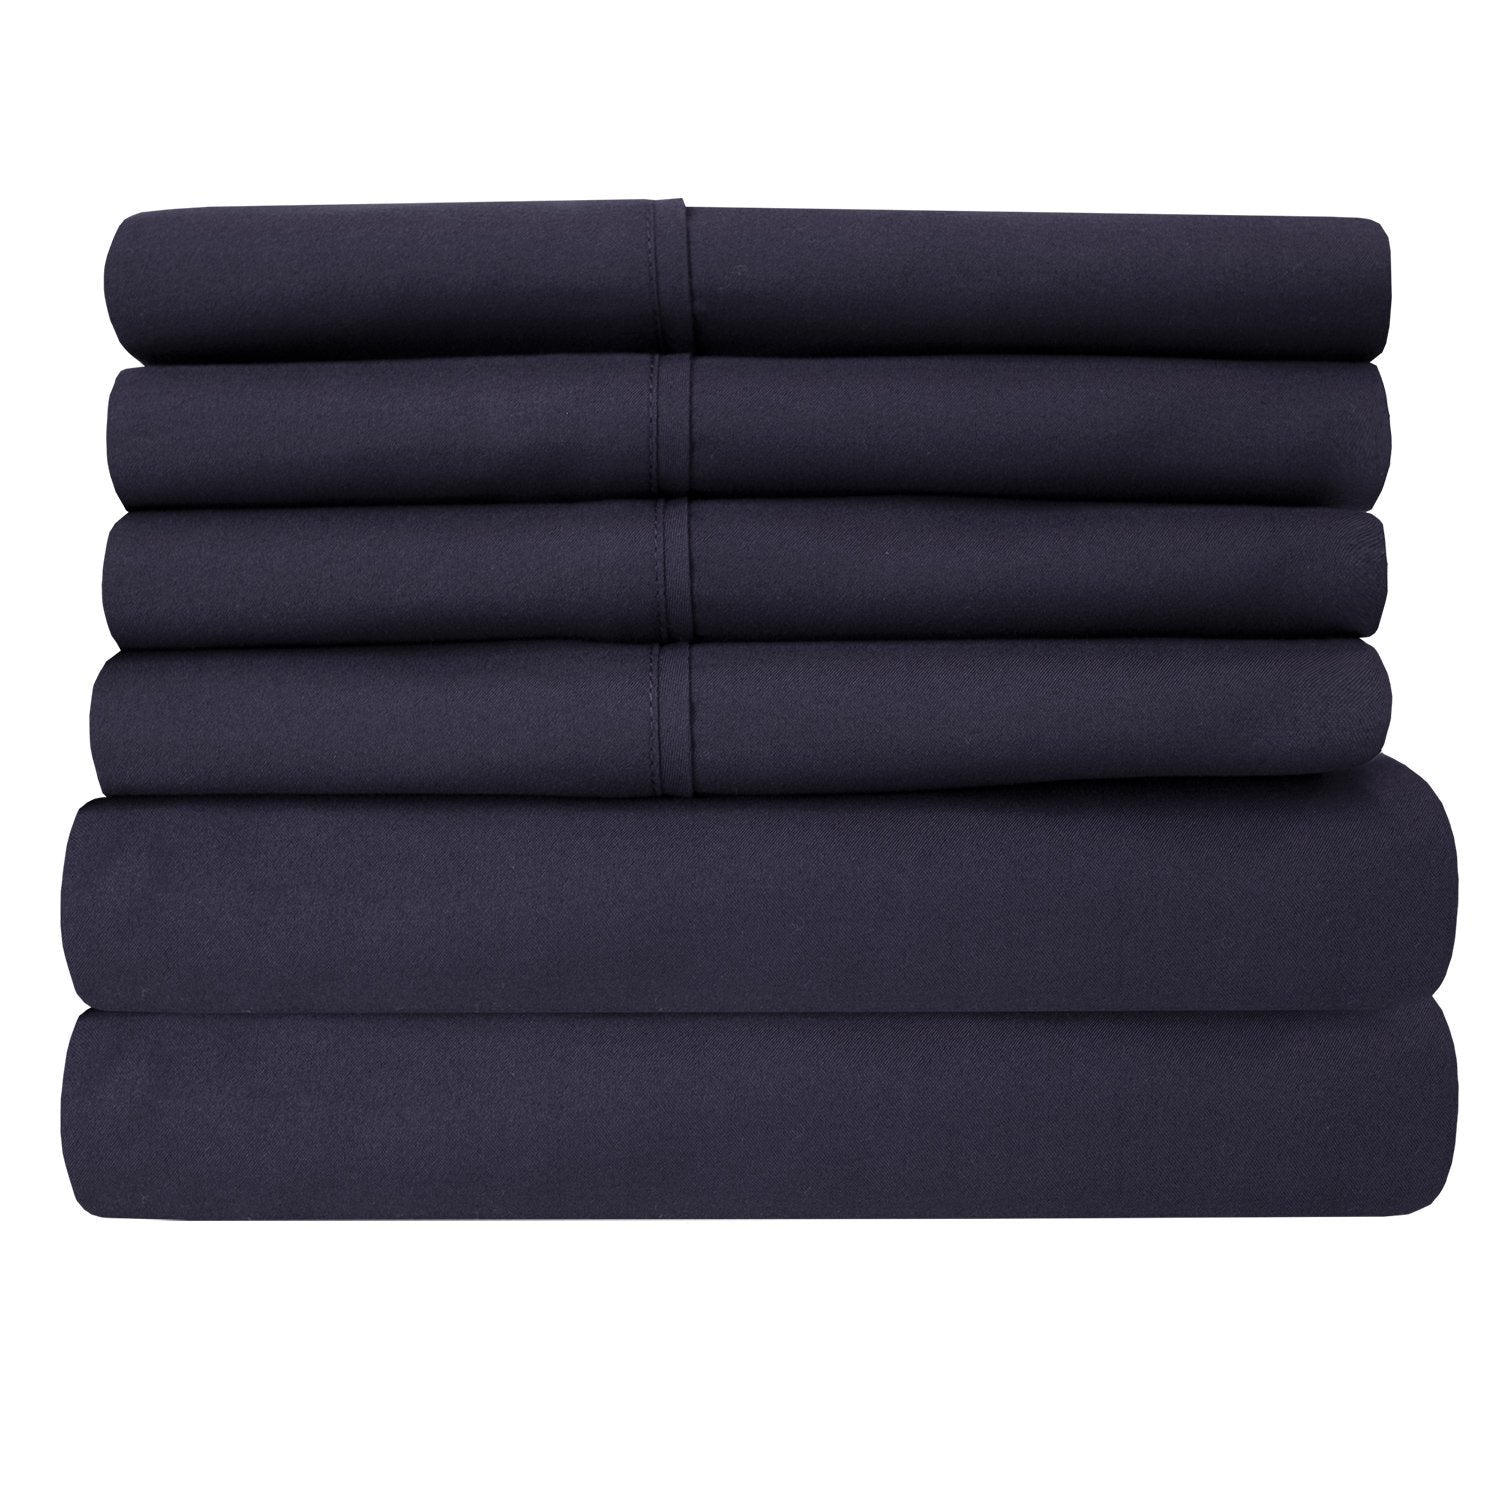 Deluxe 6-Piece Bed Sheet Set (Navy) - Folded 2